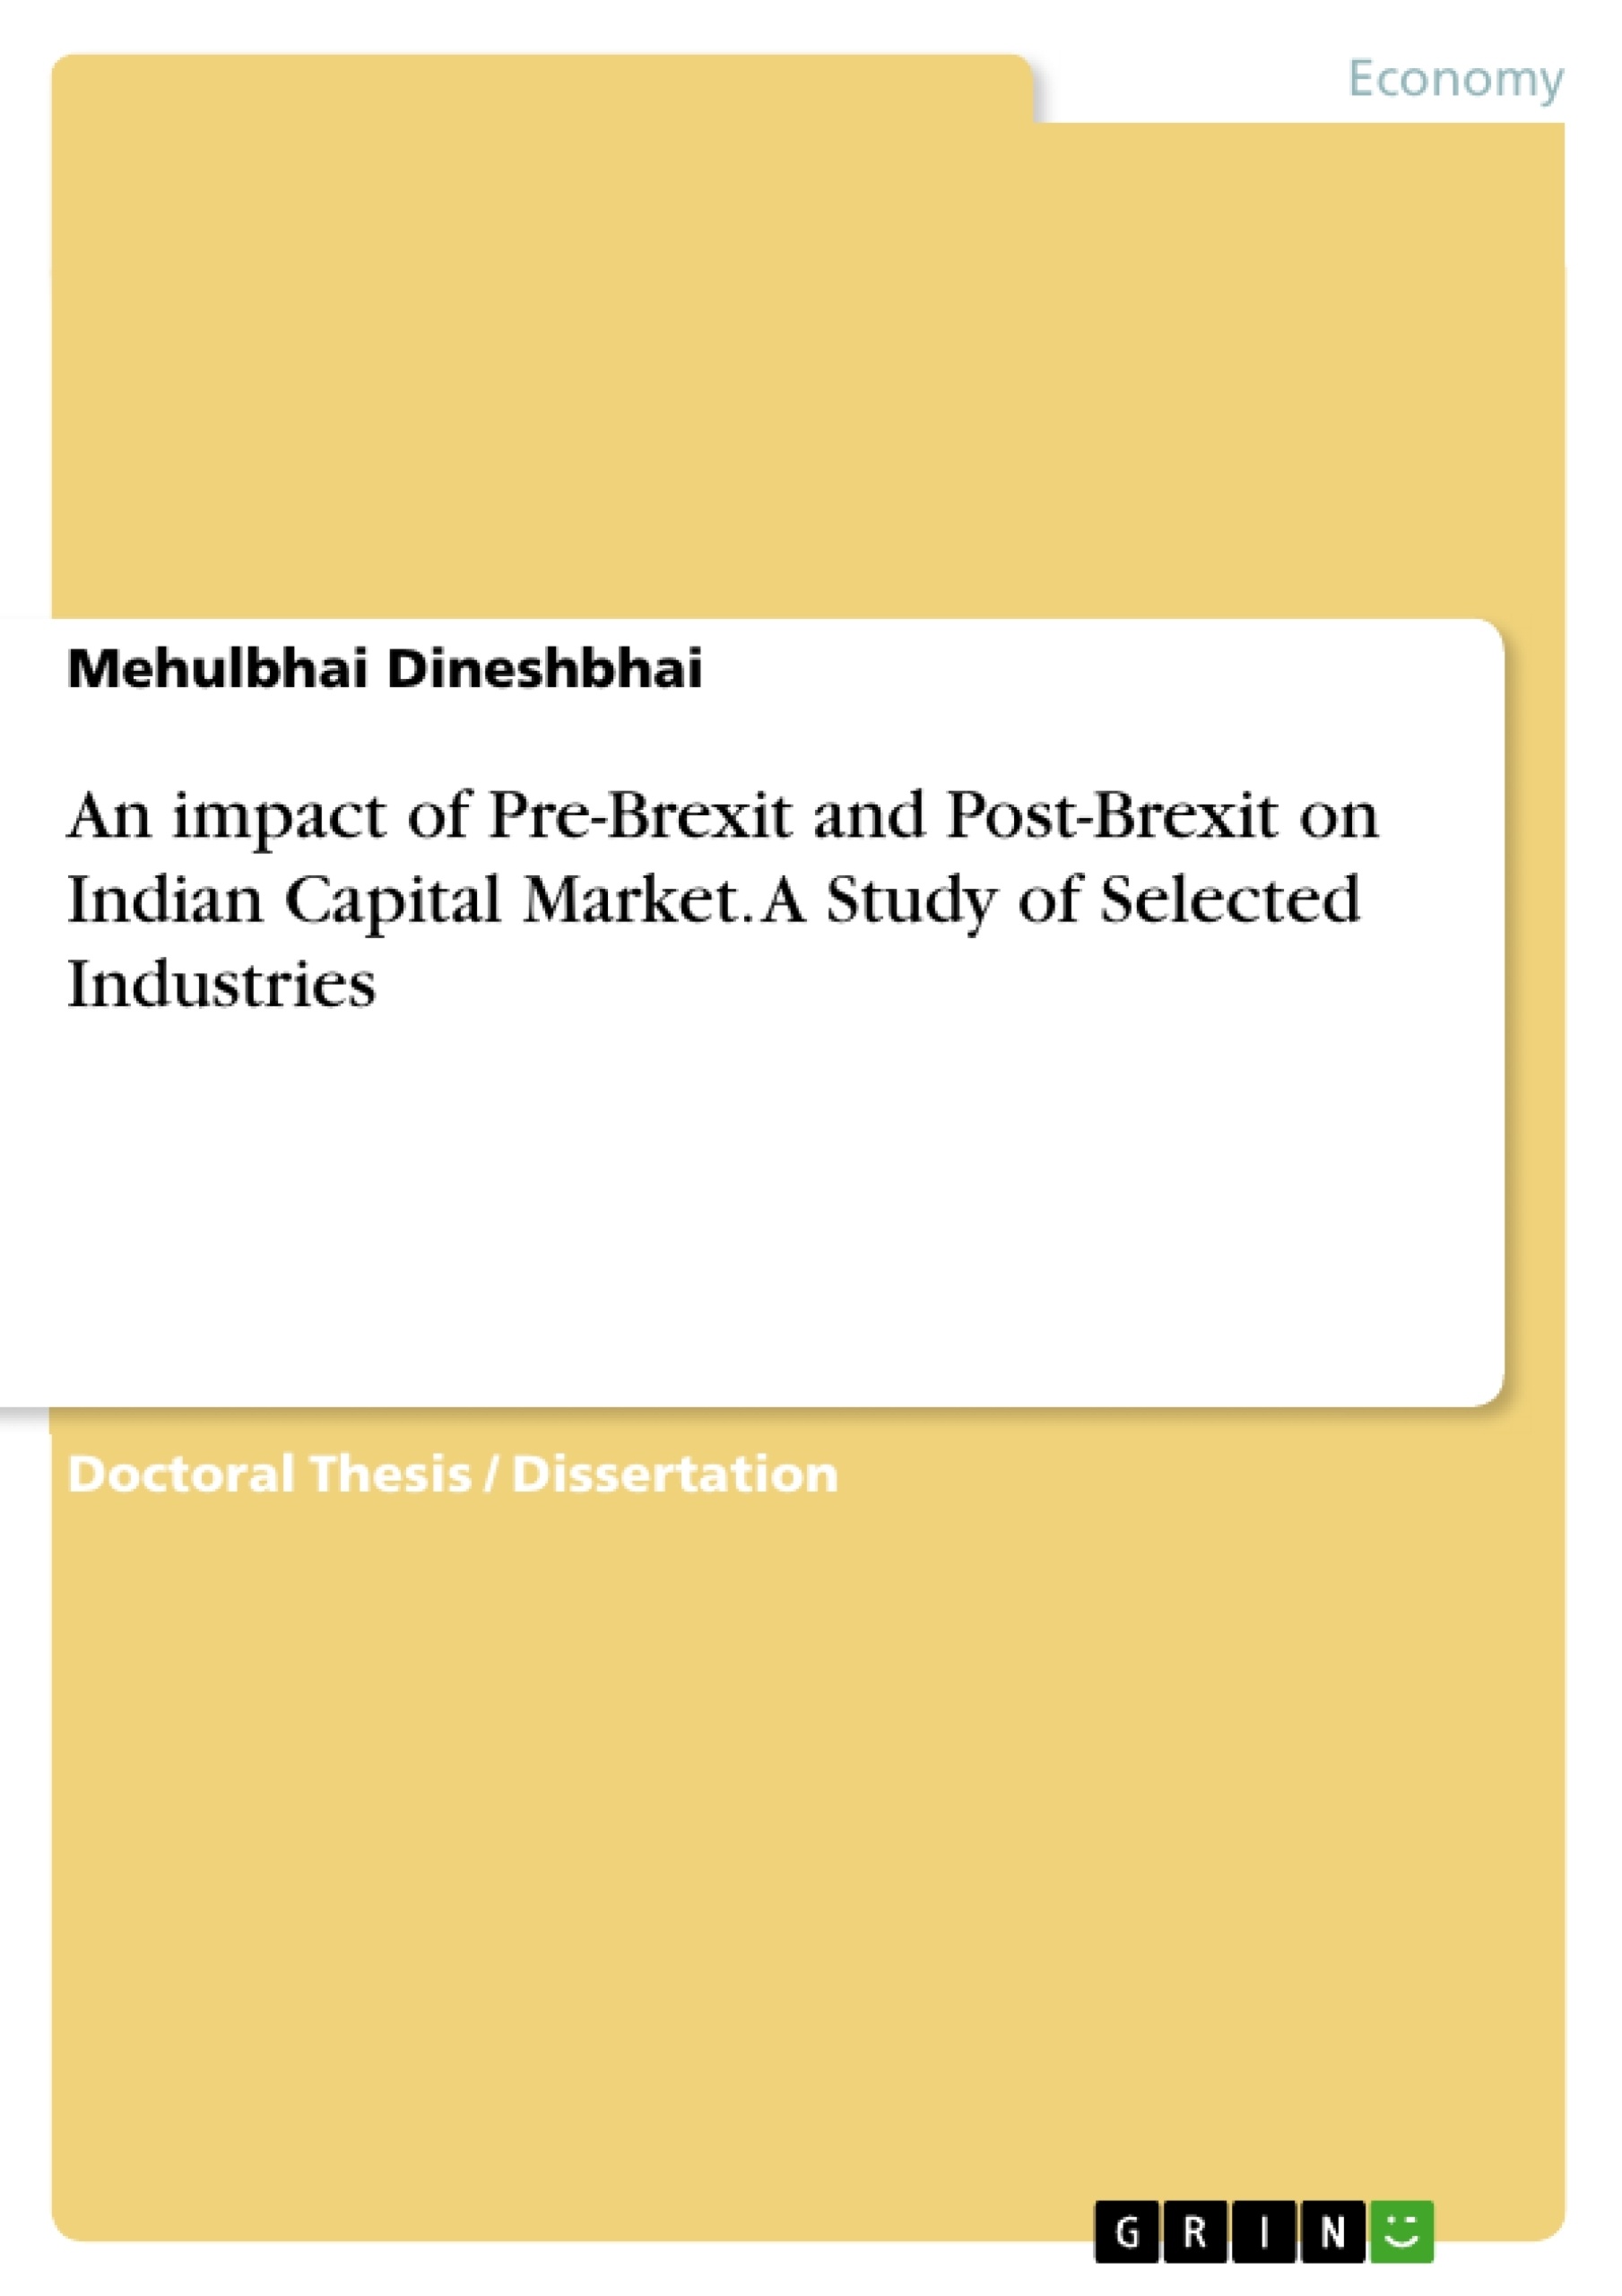 Title: An impact of Pre-Brexit and Post-Brexit on Indian Capital Market. A Study of Selected Industries